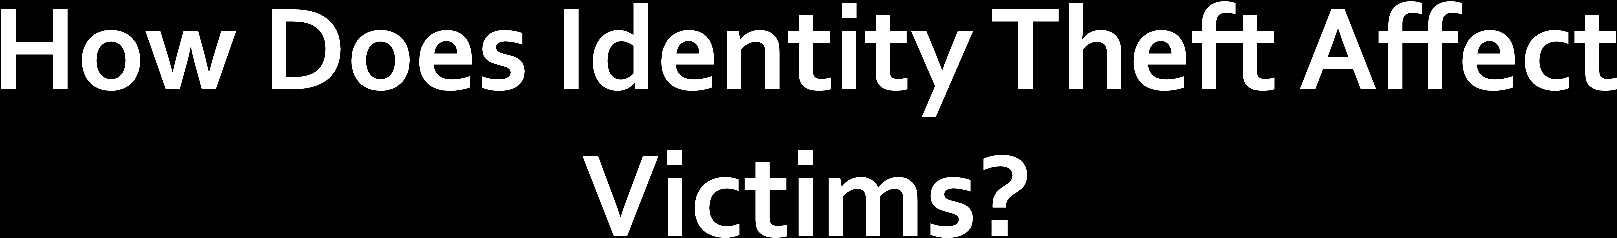 (NCVS), the definition of identity theft includes three general types of incidents: unauthorized use or attempted use of existing credit